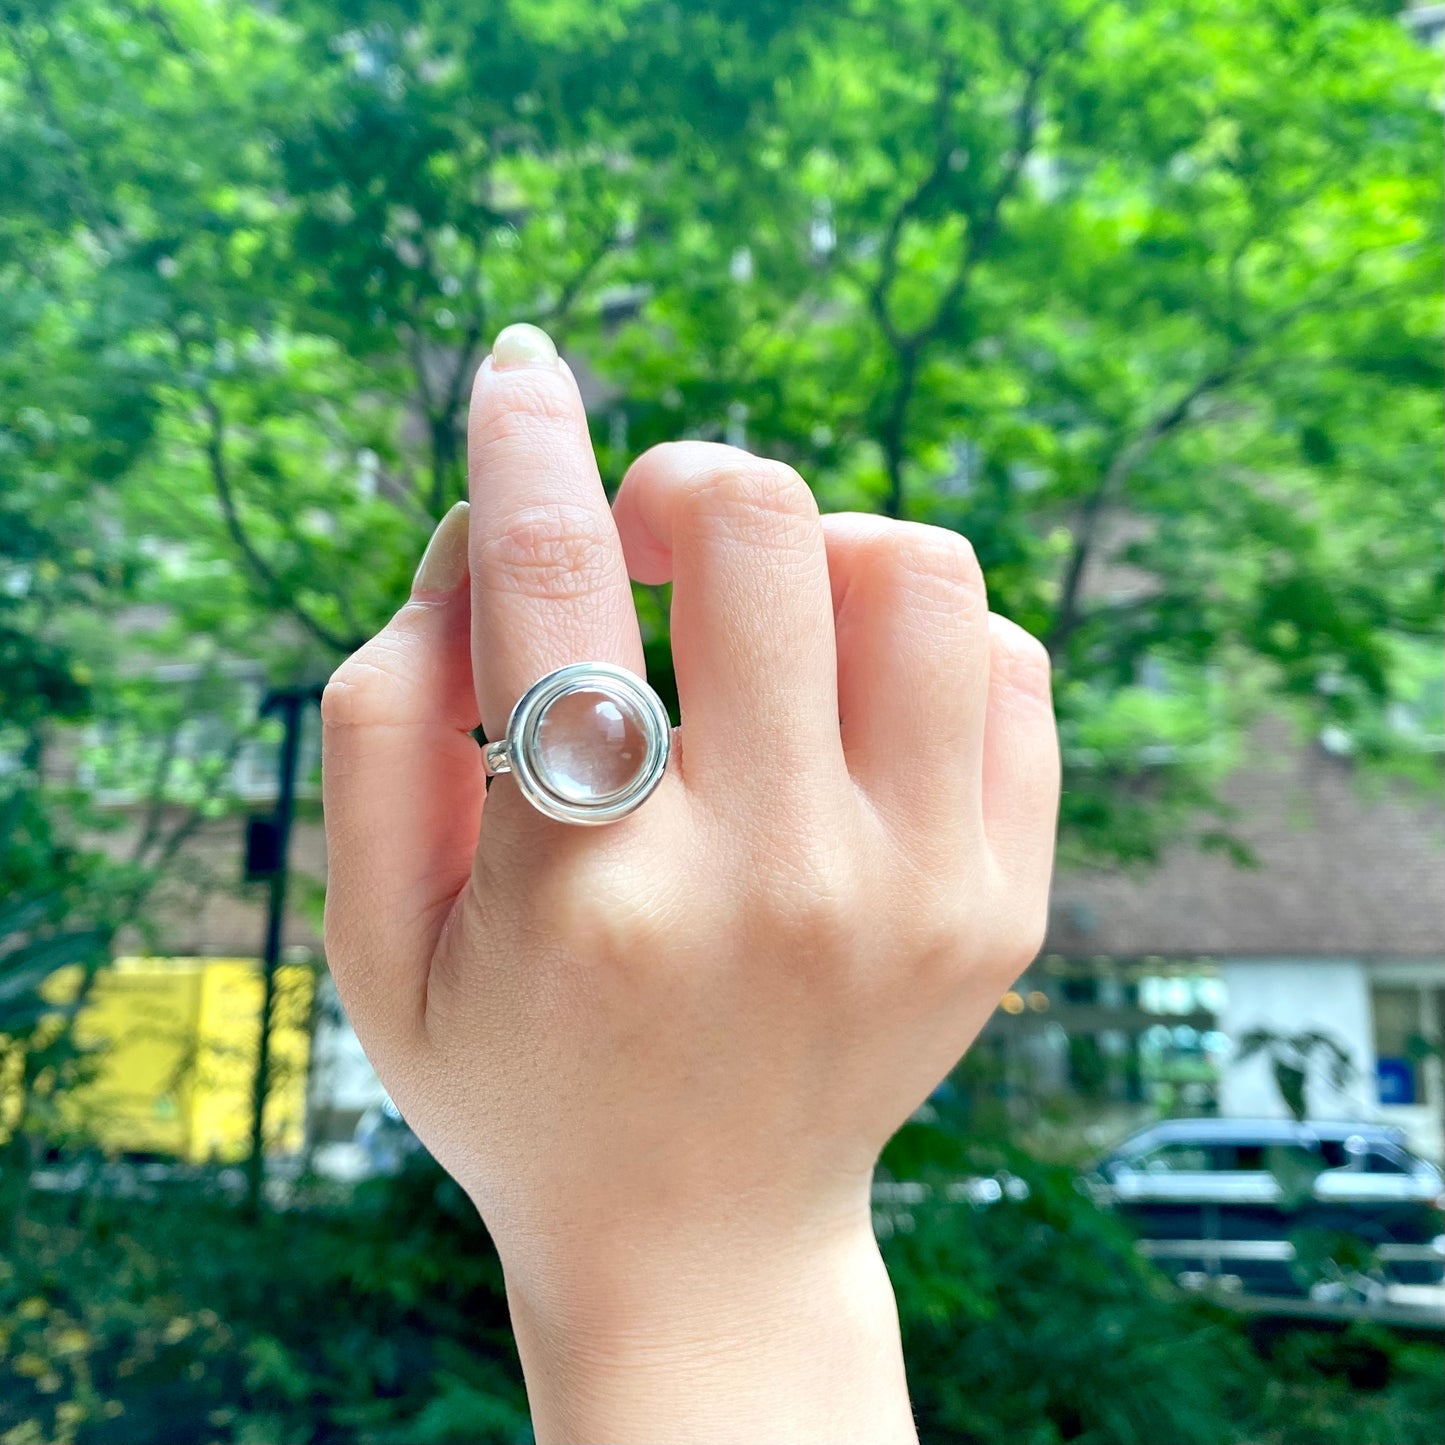 Ginza limited ring 2